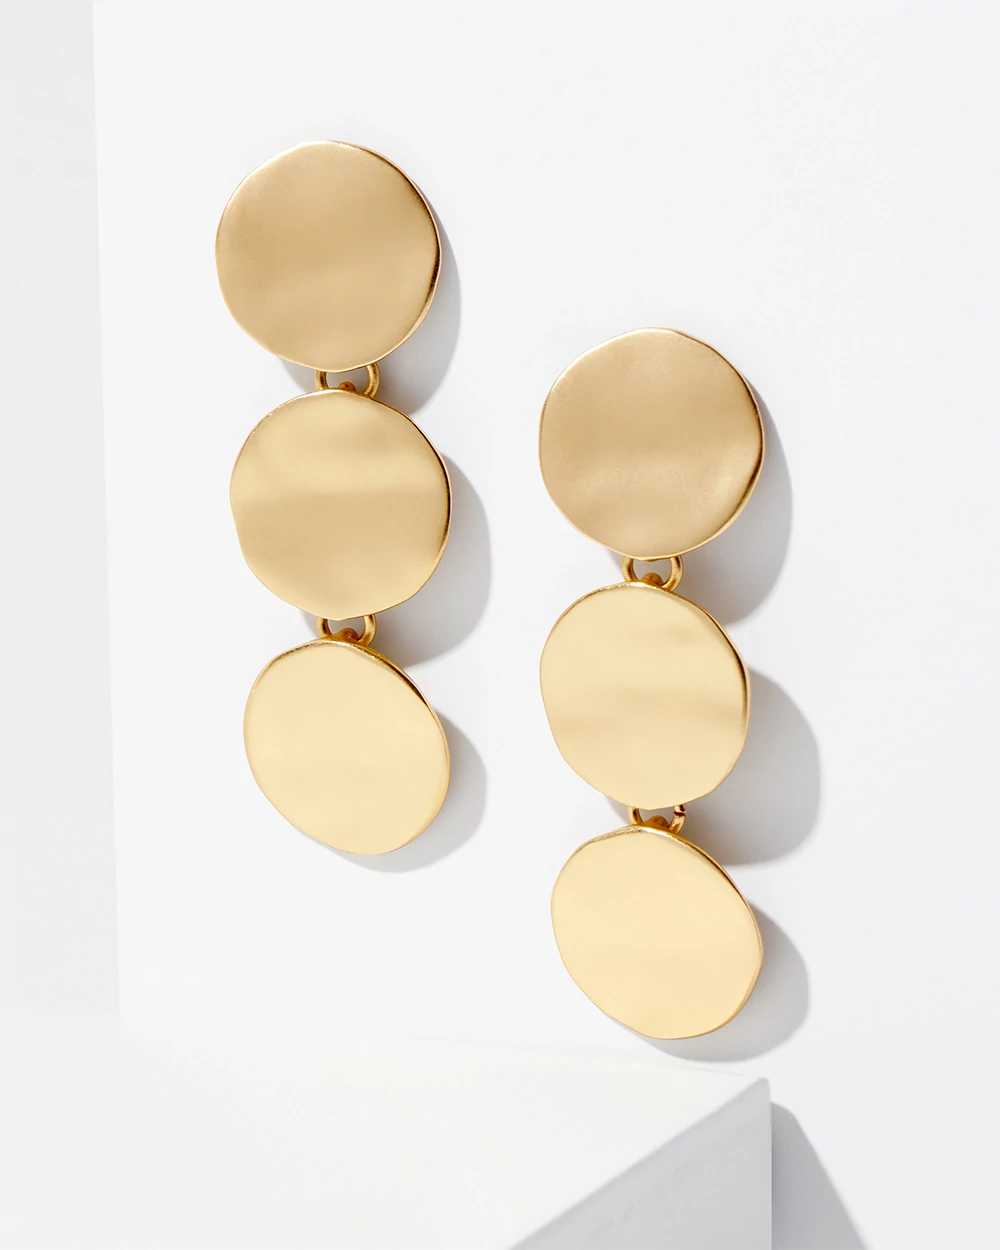 Goldtone Wavy Disc Linear Earrings click to view larger image.